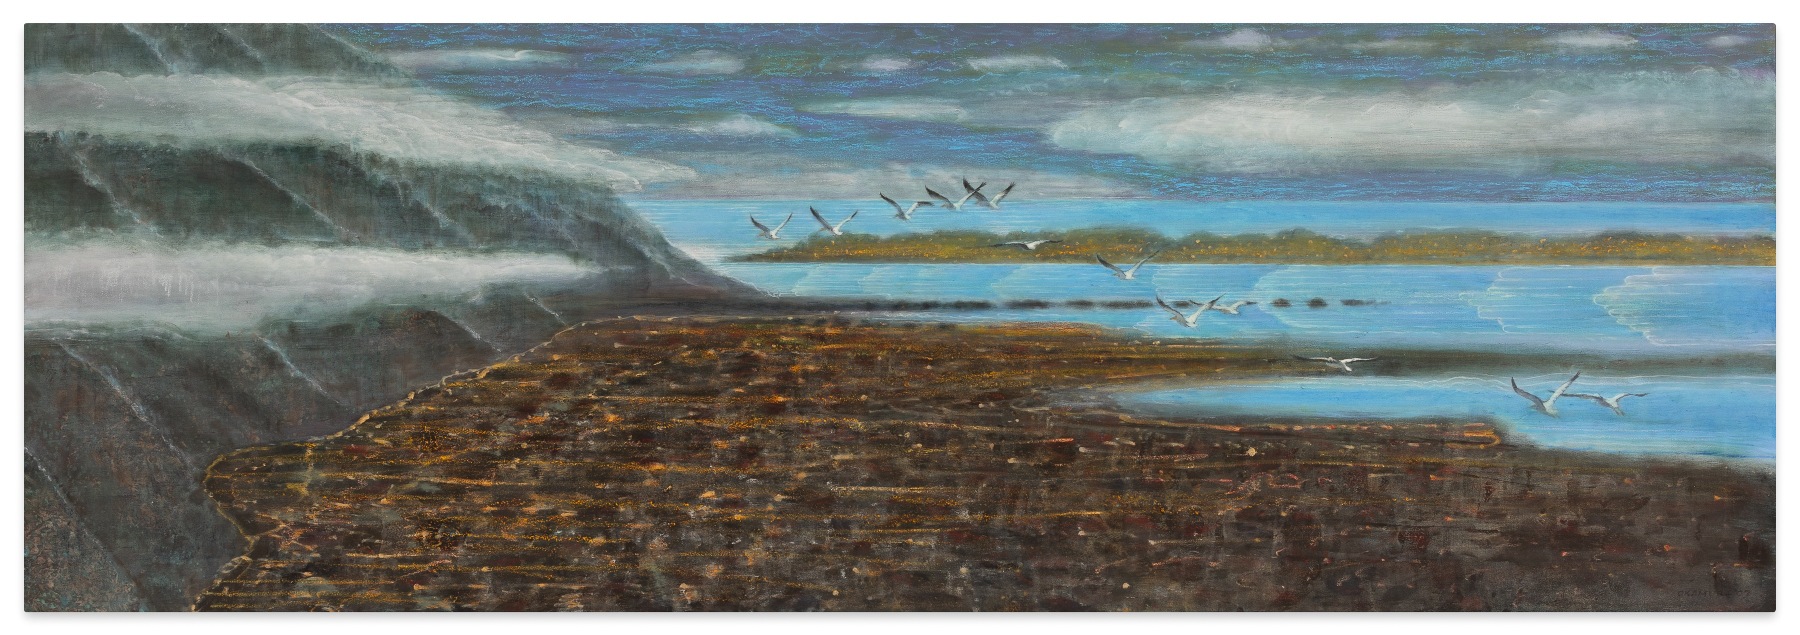 Image of Arthur Okamura's painting Pelicans / Low Tide, created circa 1995. It is made of acrylic and oil on canvas and measures 23 x 68 inches.